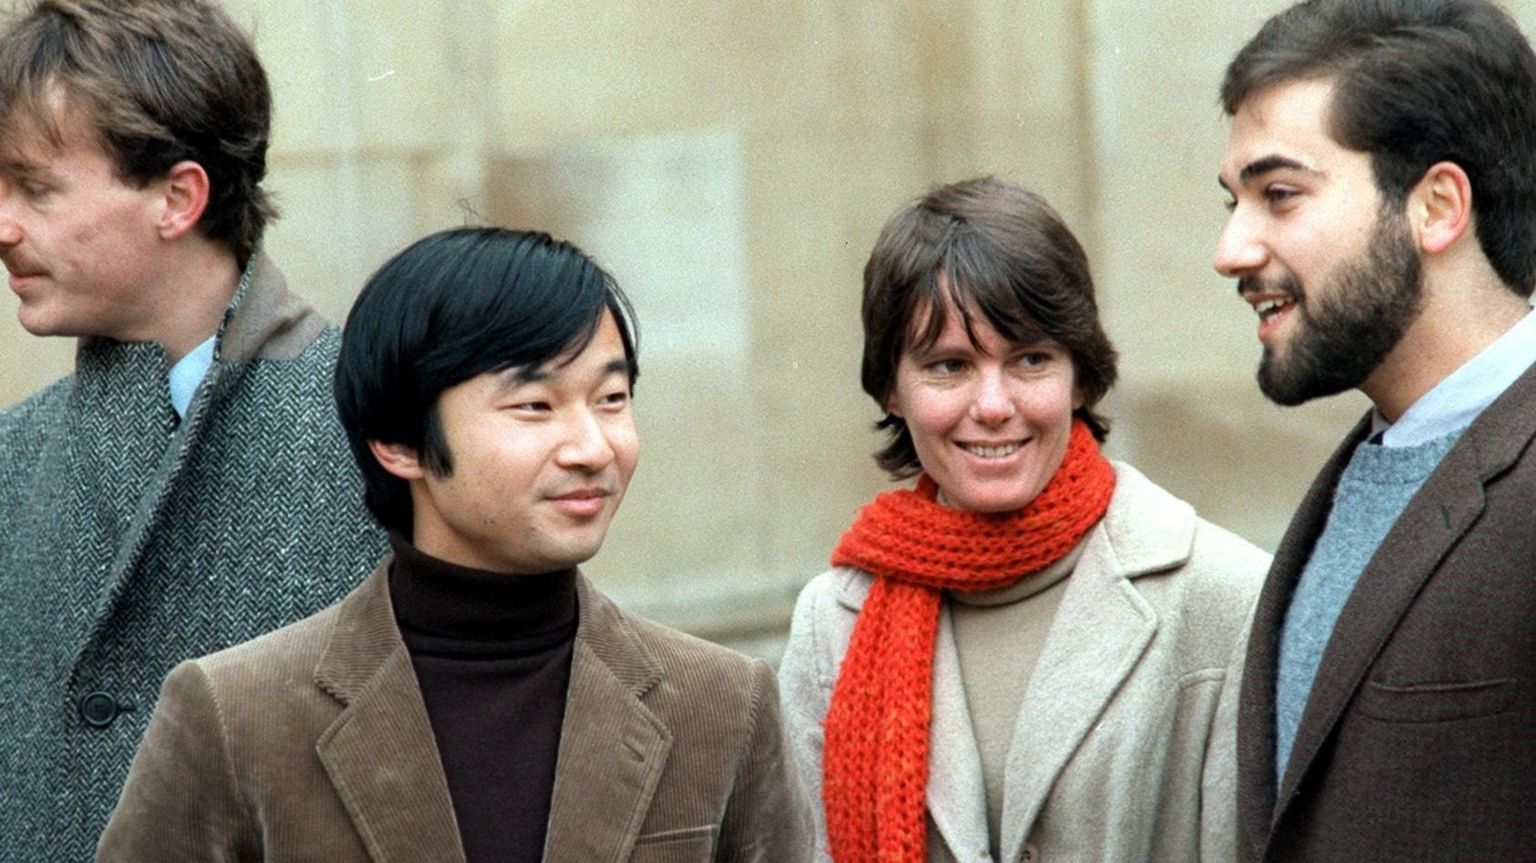 The Japanese emperor Naruhito as a student at Oxford, speaking to Keith George. The future emperor is smiling and wearing a black top, underneath a brown jacket. Keith George wears a blue top and a brown jacket. In the background, a man in a grey coat is looking away form the camera. A smiling woman with a red scarf around her neck looks at Keith George 